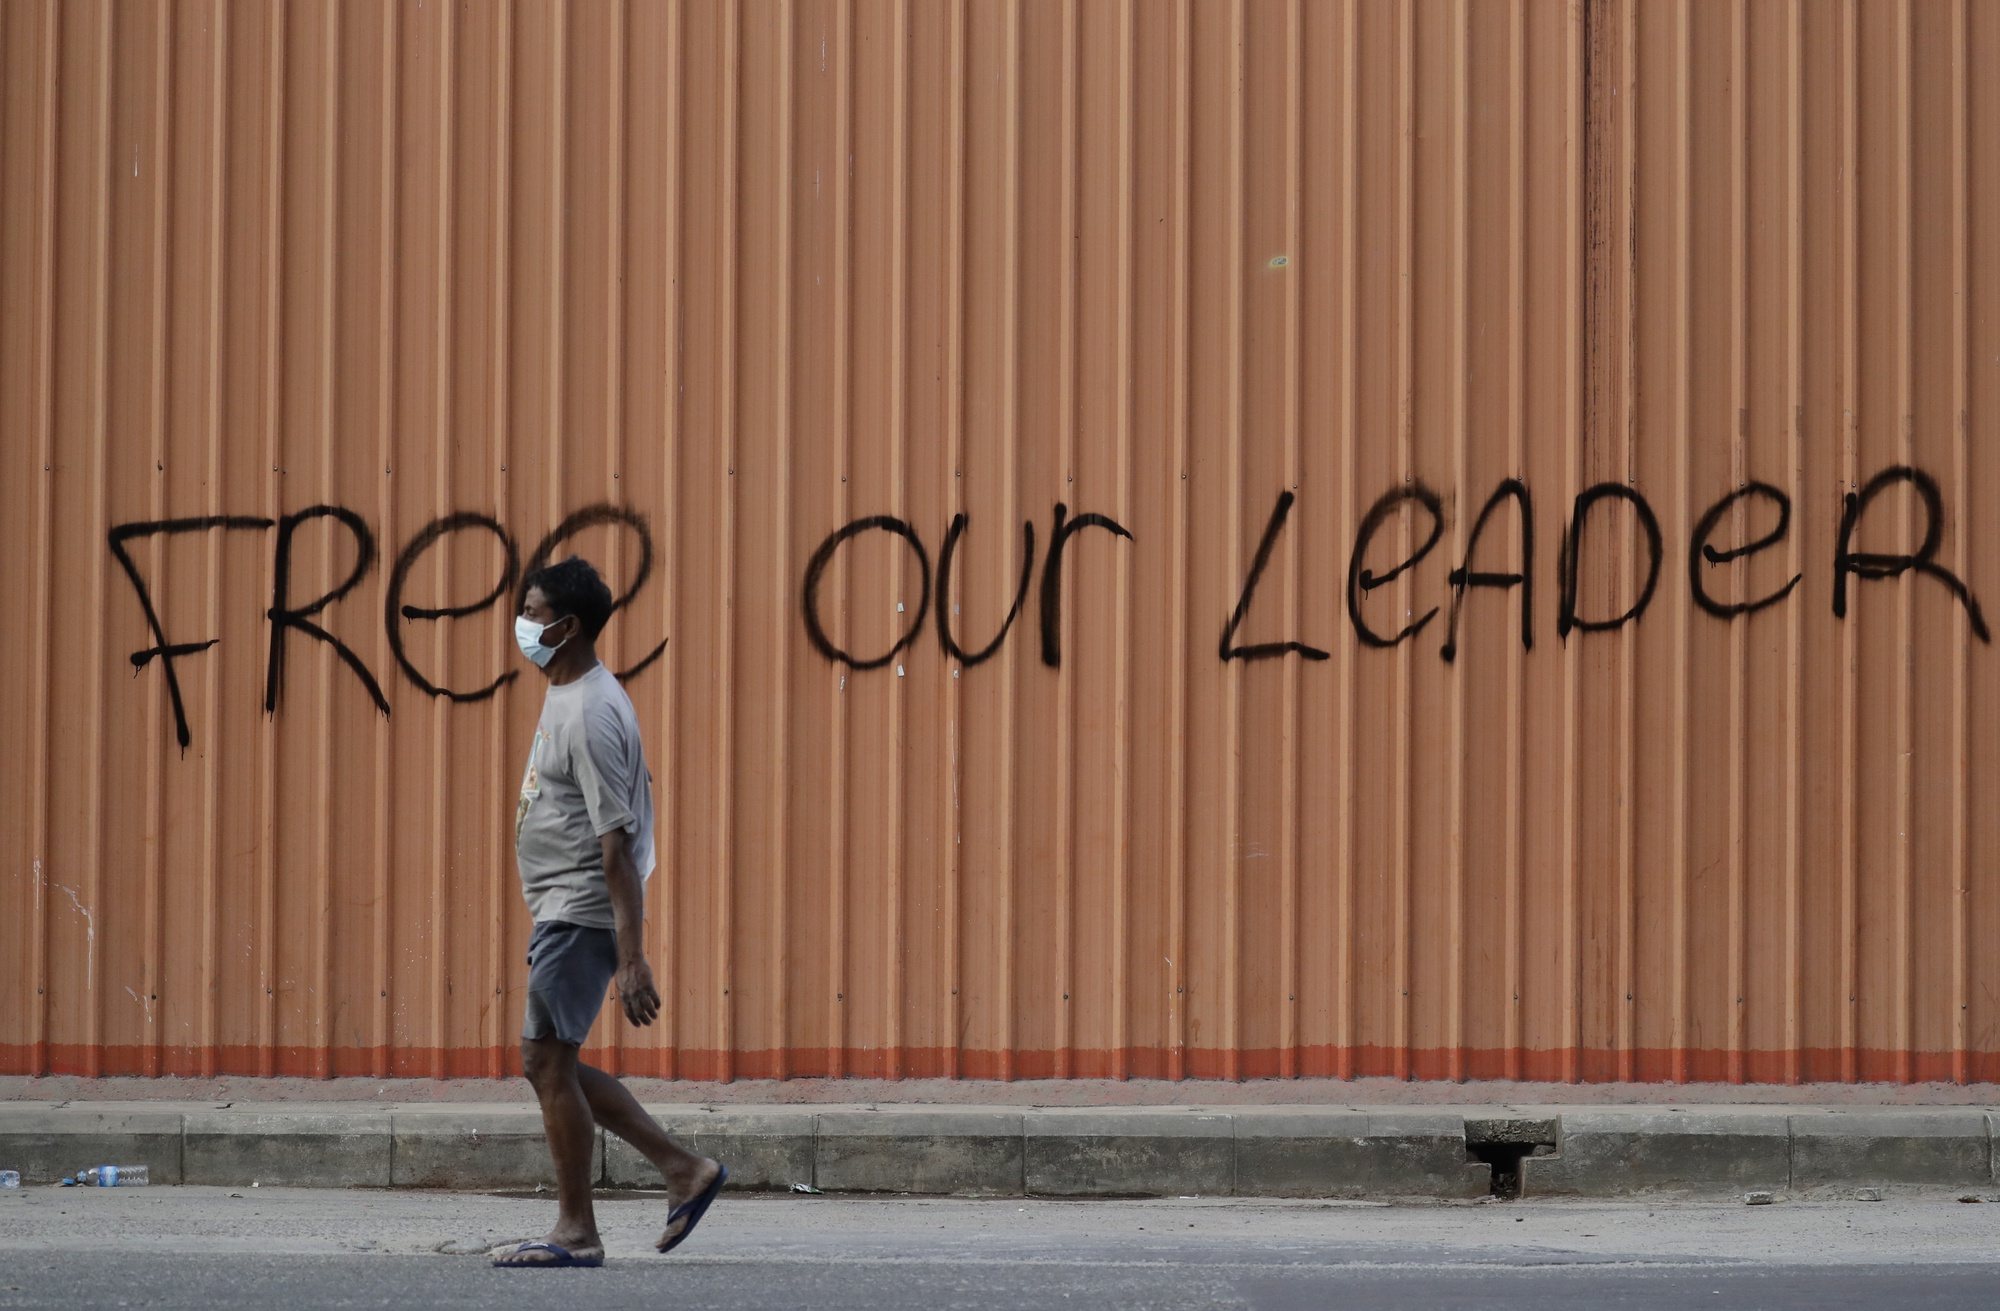 epa08996371 A man walks past a wall sprayed with the words &#039;Free Our Leader&#039; in the downtown area of Yangon, Myanmar, 08 February 2021. Thousands of people across Myanmar took to the streets for a third day of mass protests against the military coup. Myanmar&#039;s military seized power and declared a state of emergency for one year after arresting State Counselor Aung San Suu Kyi and Myanmar president Win Myint in an early morning raid on 01 February.  EPA/LYNN BO BO